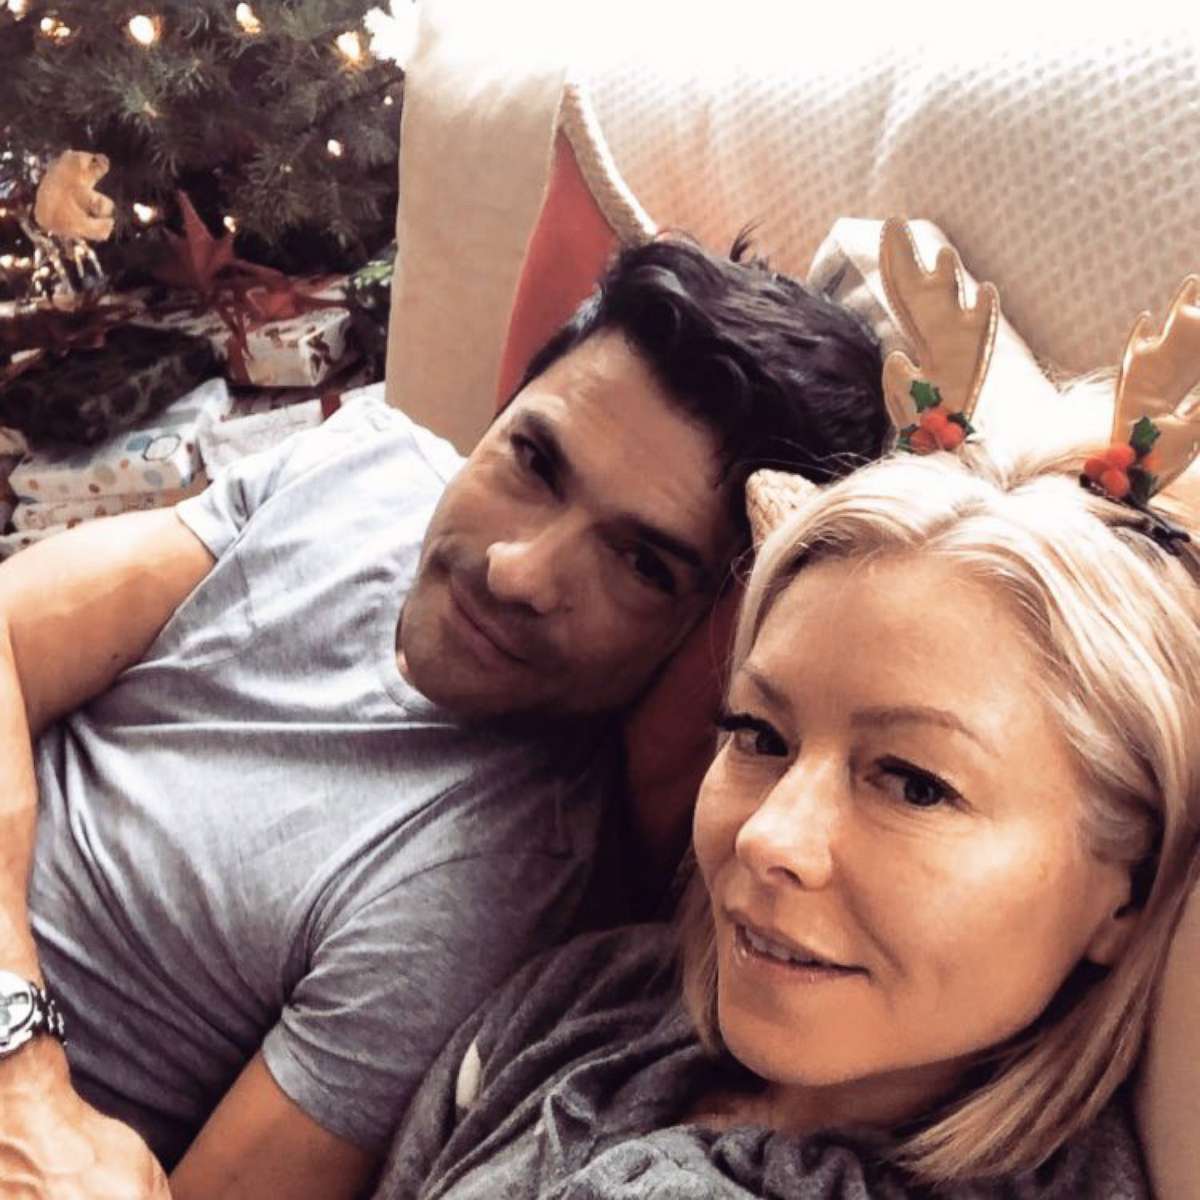 PHOTO: Kelly Ripa shared this image to her Instagram account, Dec. 25, 2017.